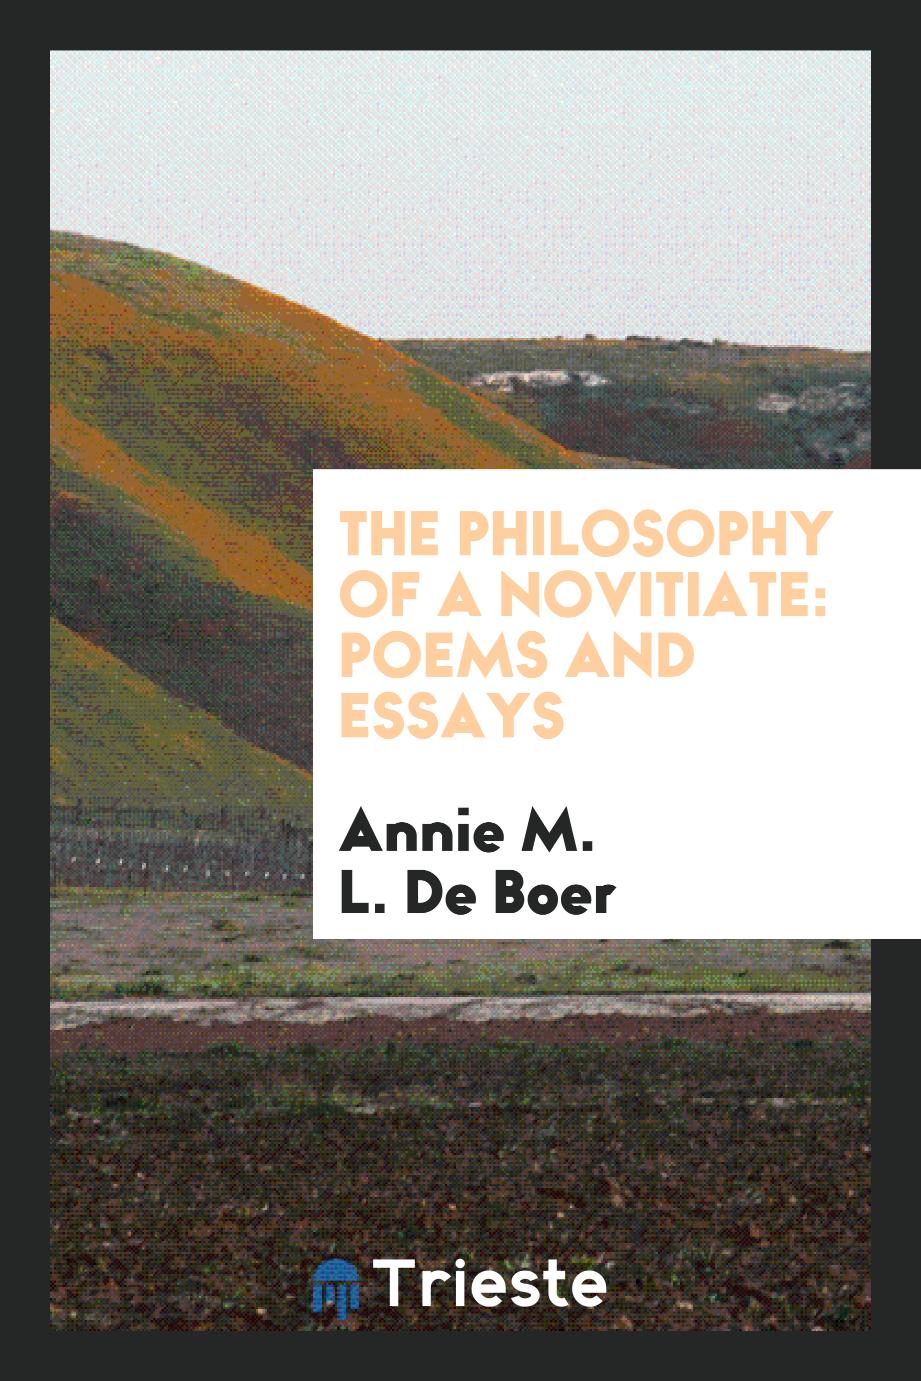 The Philosophy of a Novitiate: Poems and Essays